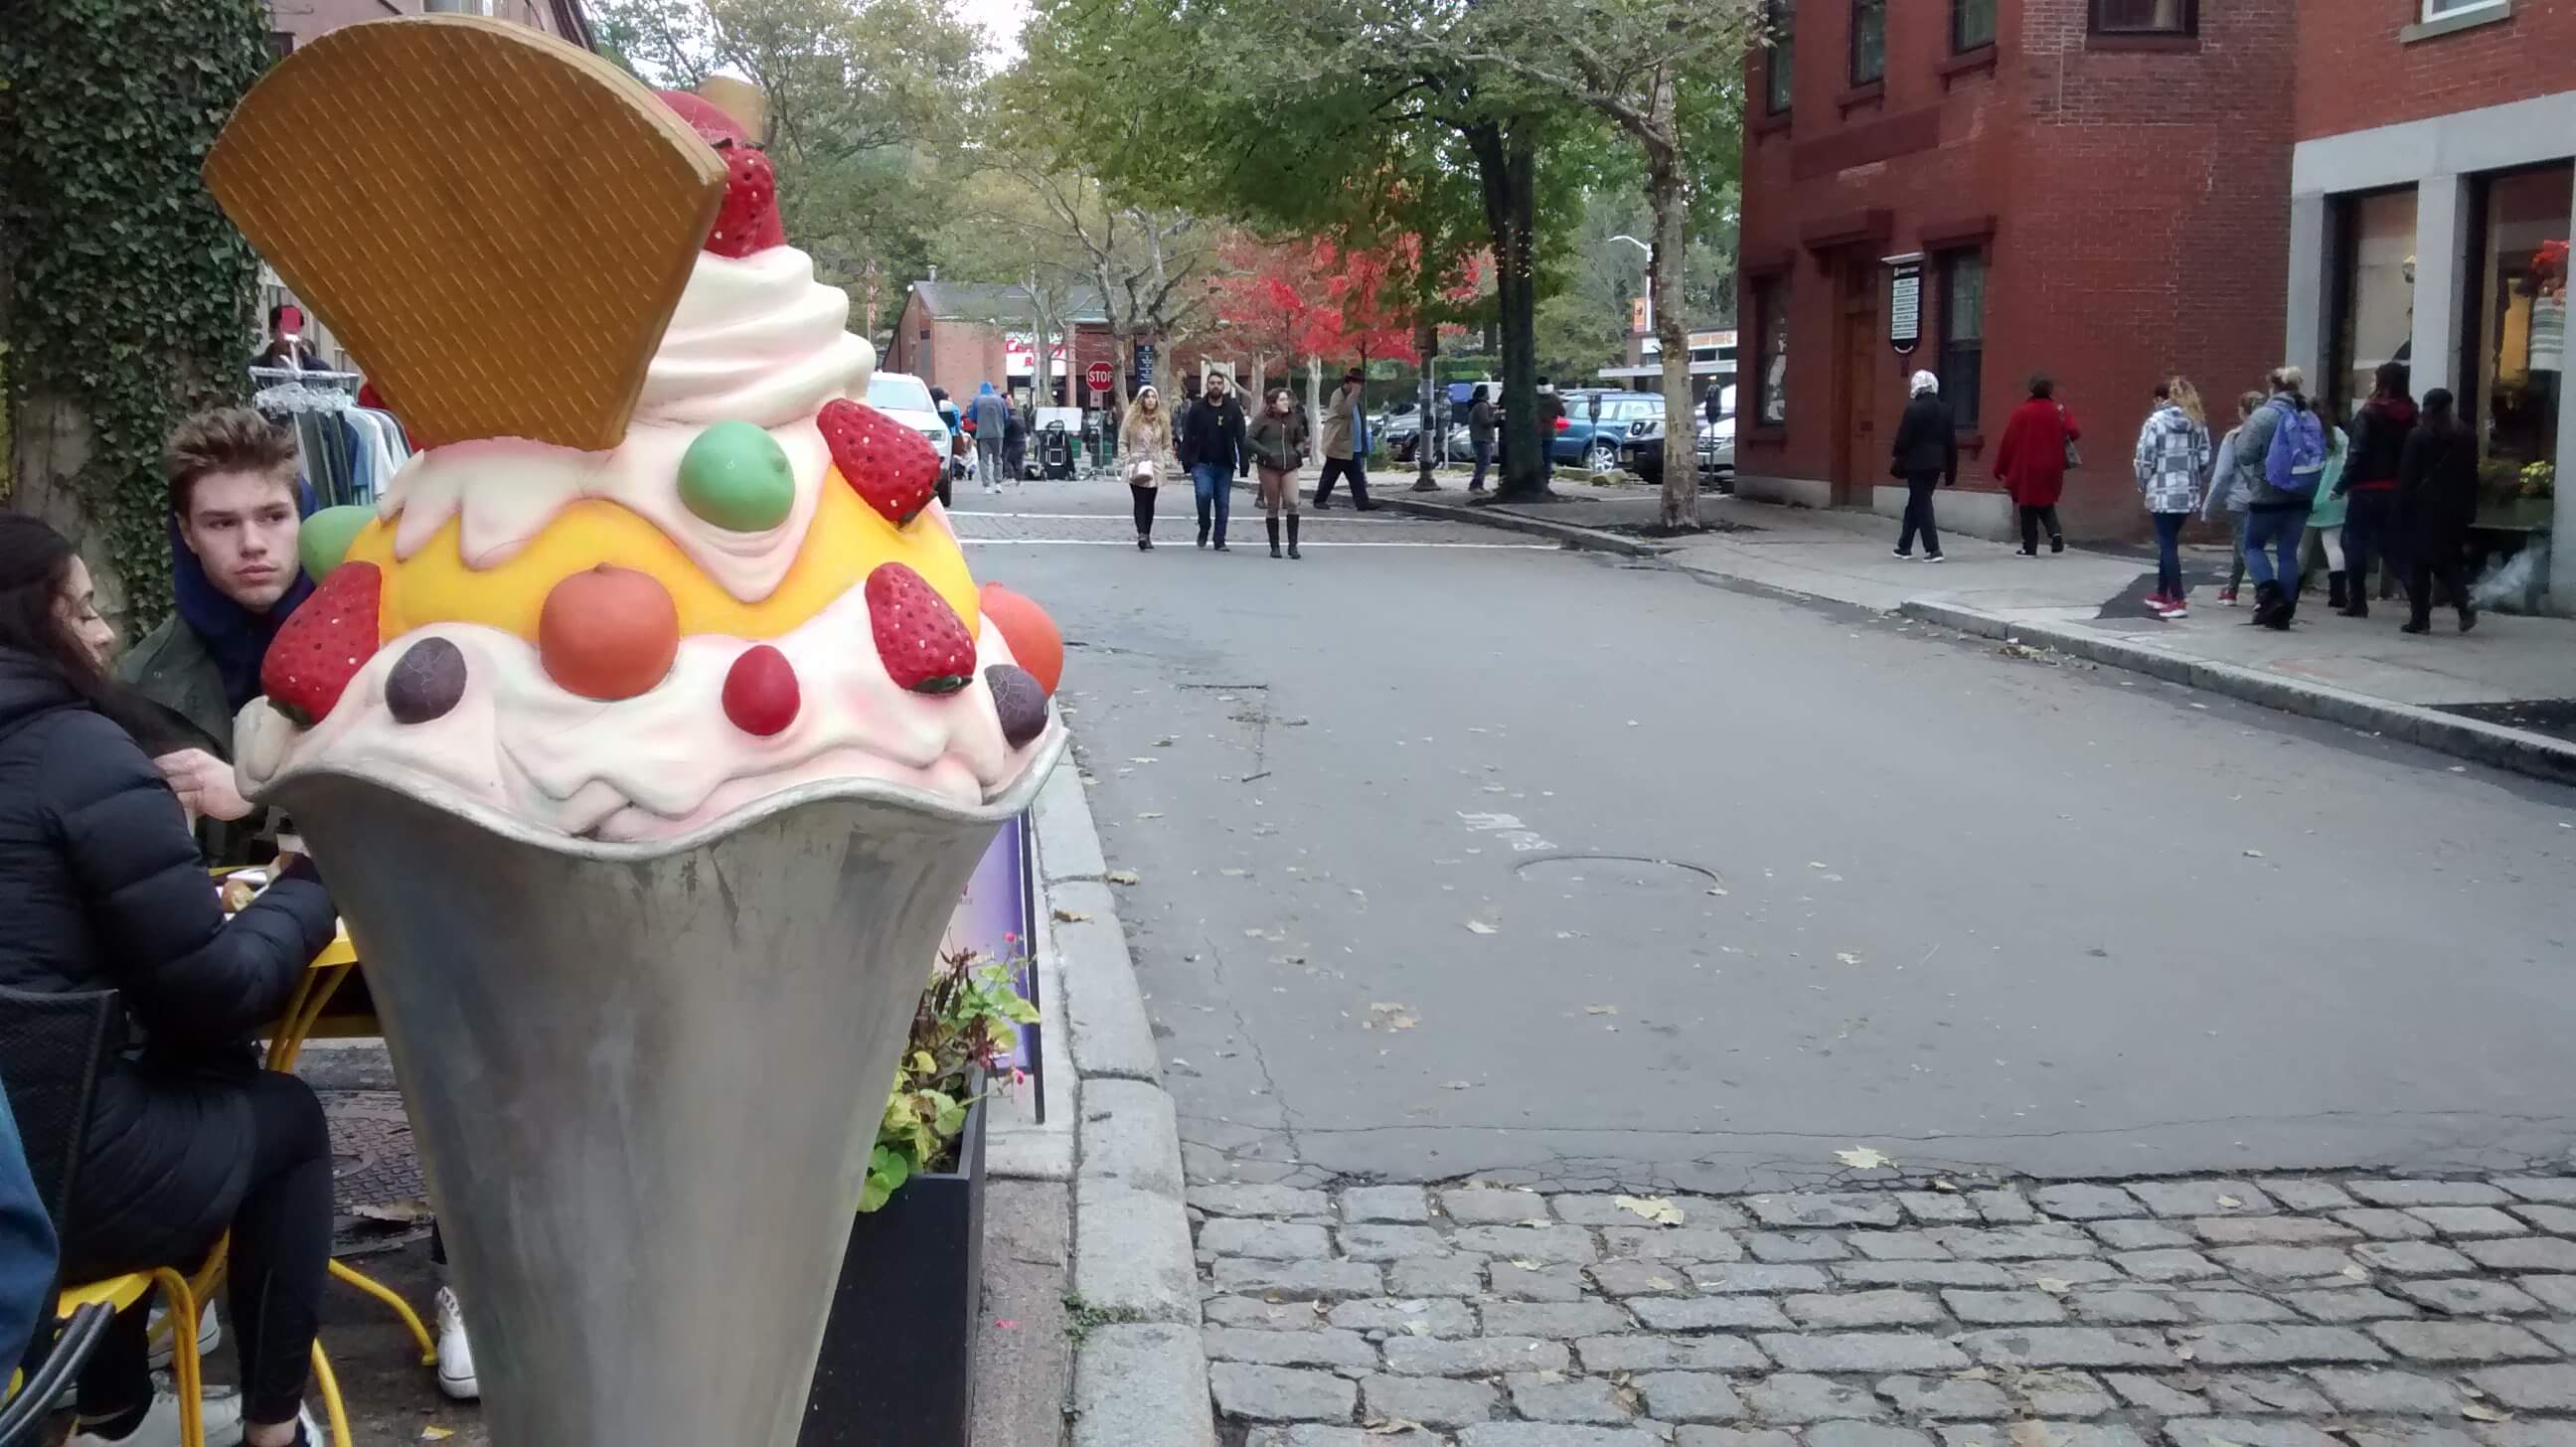 A large display ice cream cone on Front Street.